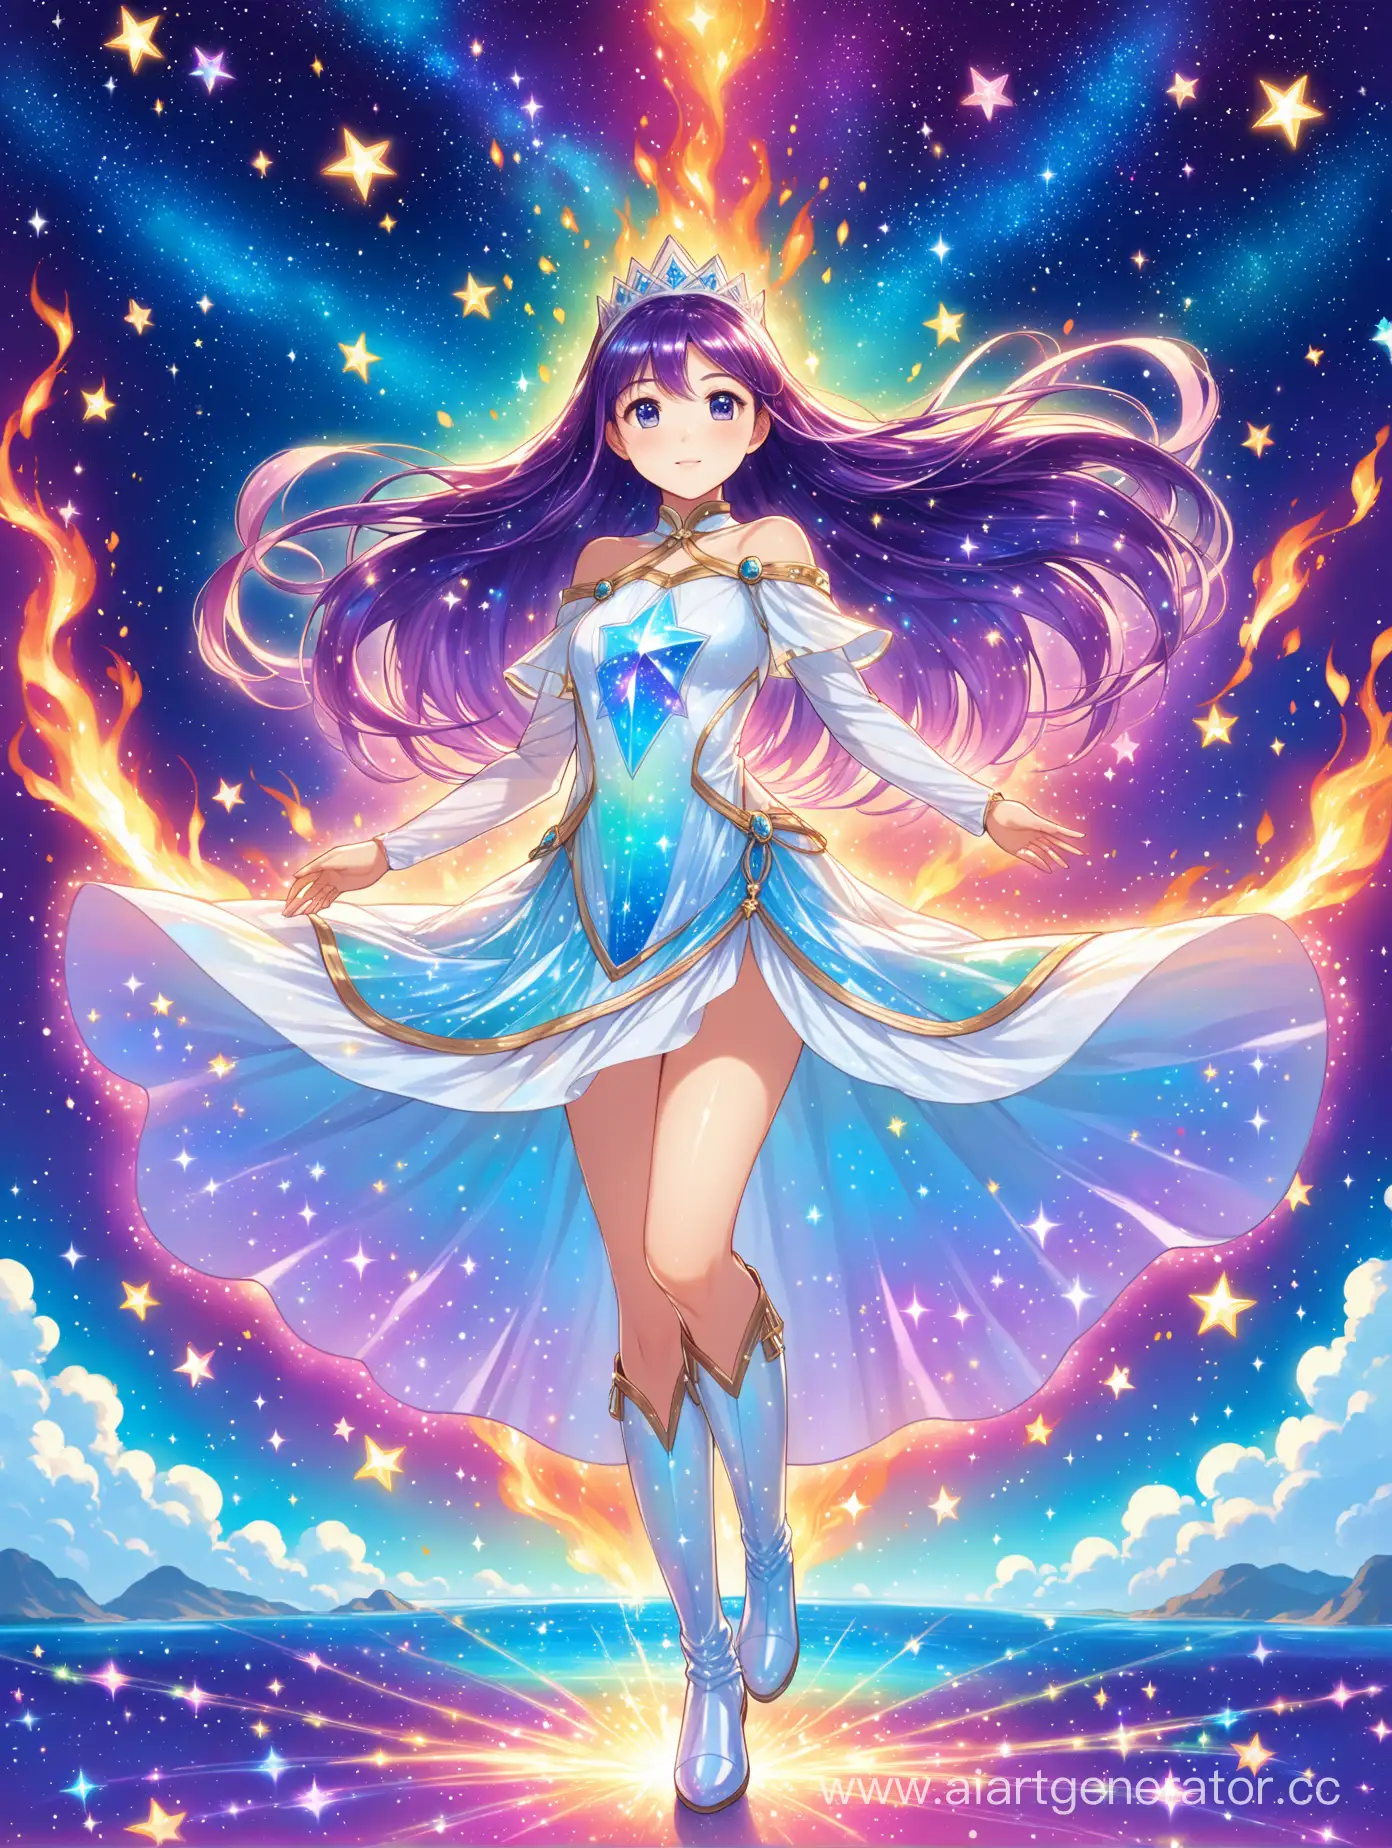 Star-Princess-in-Shimmering-Purple-Hair-and-CrystalAdorned-Tunic